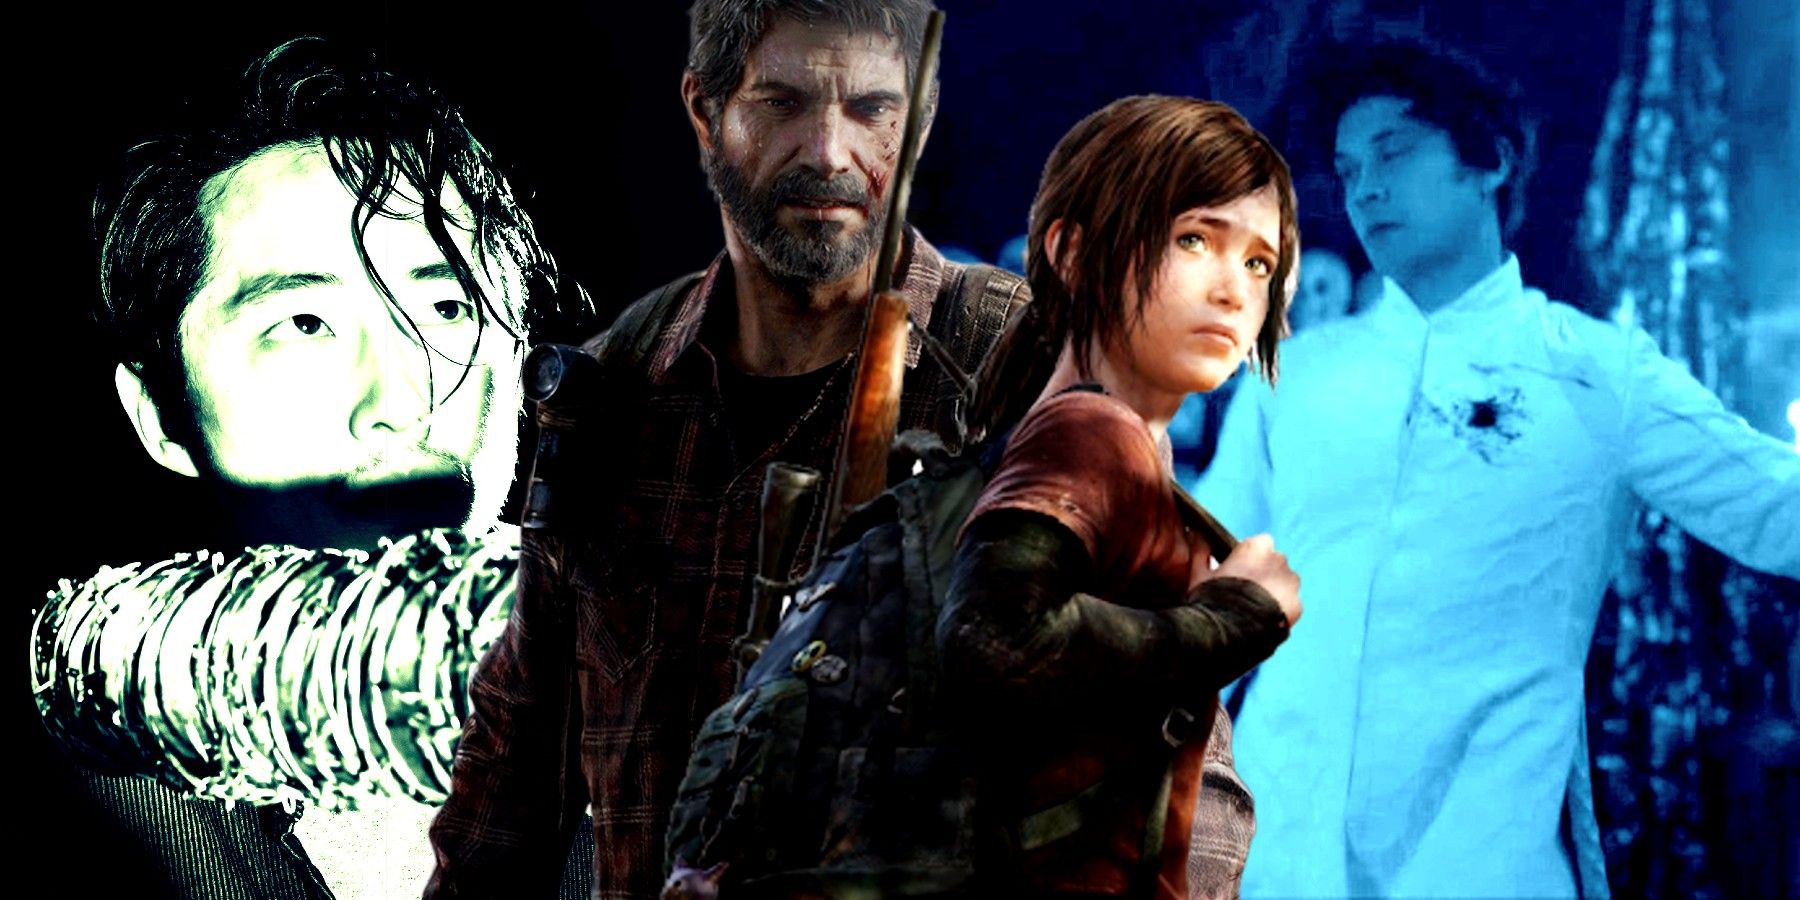 A Key Death Hits Way Harder In HBO's The Last Of Us